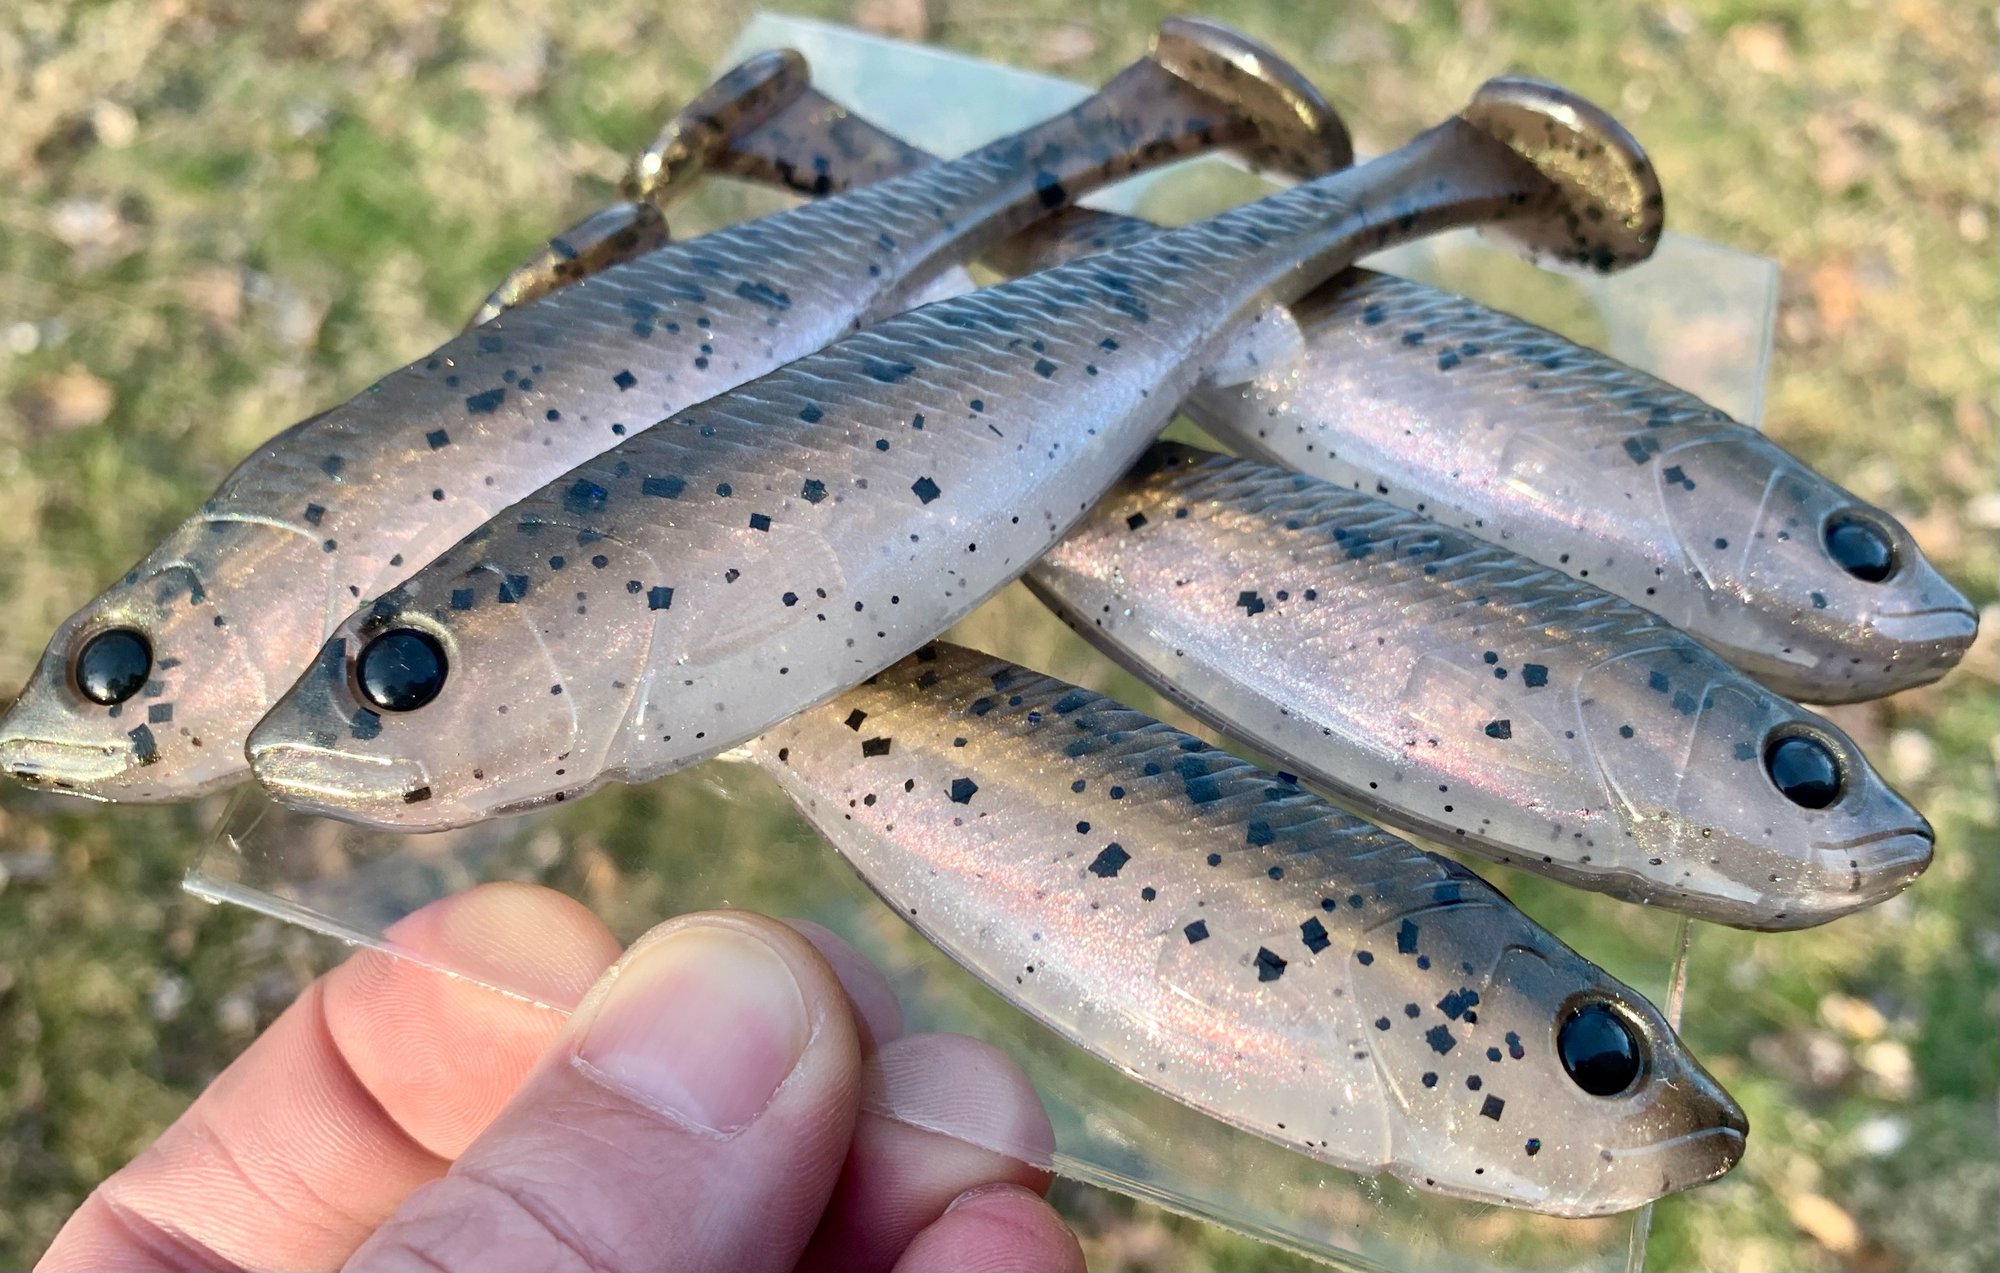 https://assets.bigcartel.com/product_images/e31ba0a4-6b6c-452d-9444-f028b1e17935/5-g5-hand-poured-swimbaits-goby.jpg?auto=format&fit=max&w=2000